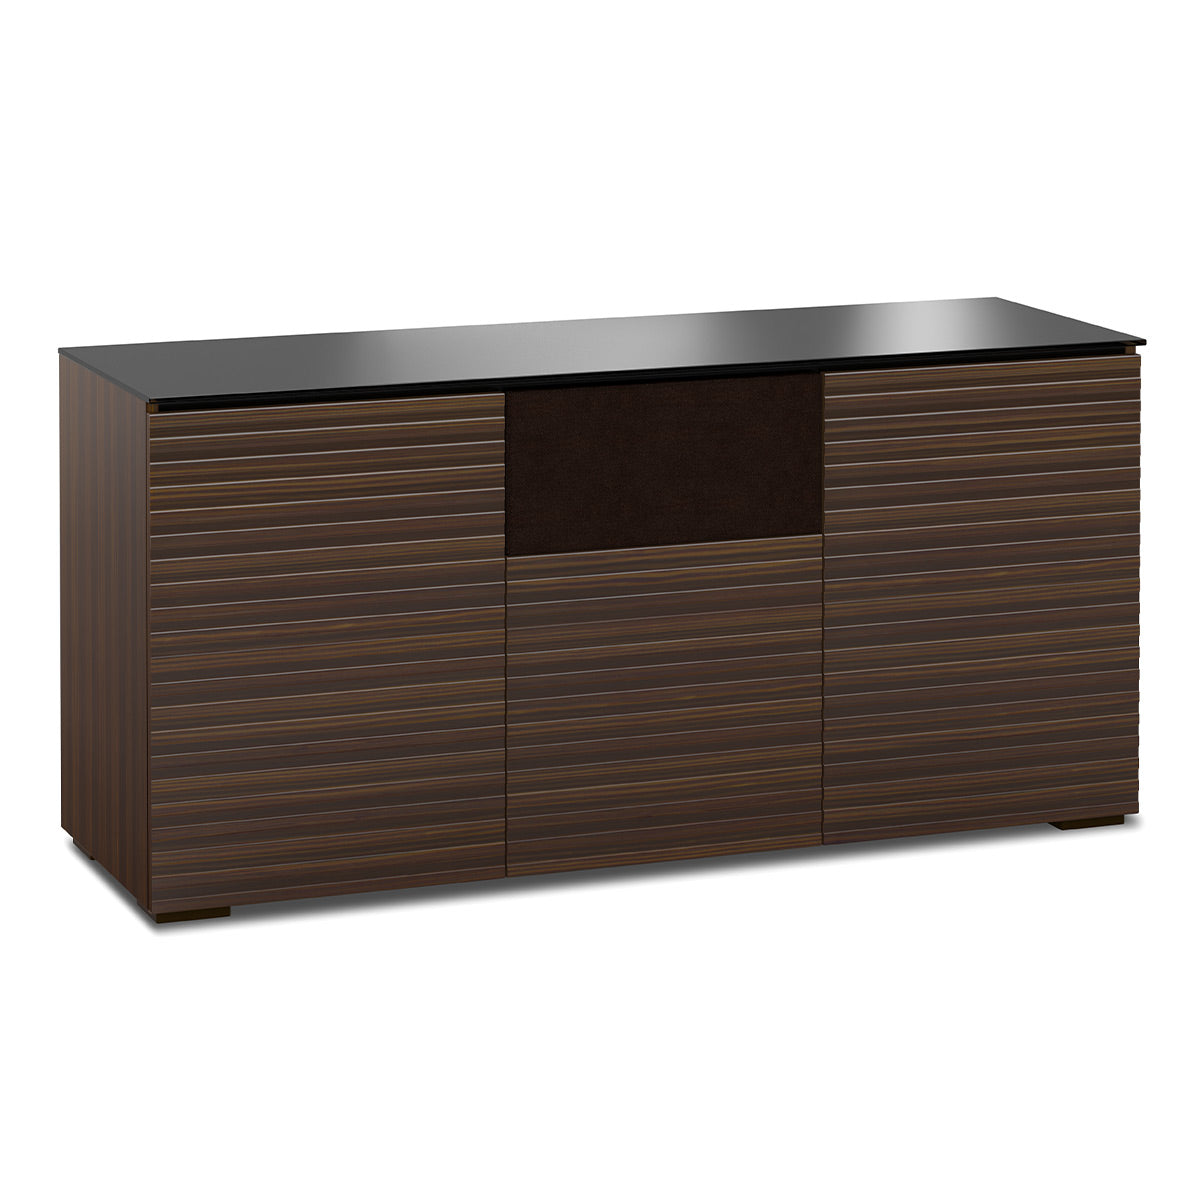 Salamander Chameleon Collection Zurich 336 Triple Speaker Integrated Cabinet (Horizontal Wood Pattern with Black Glass Top)